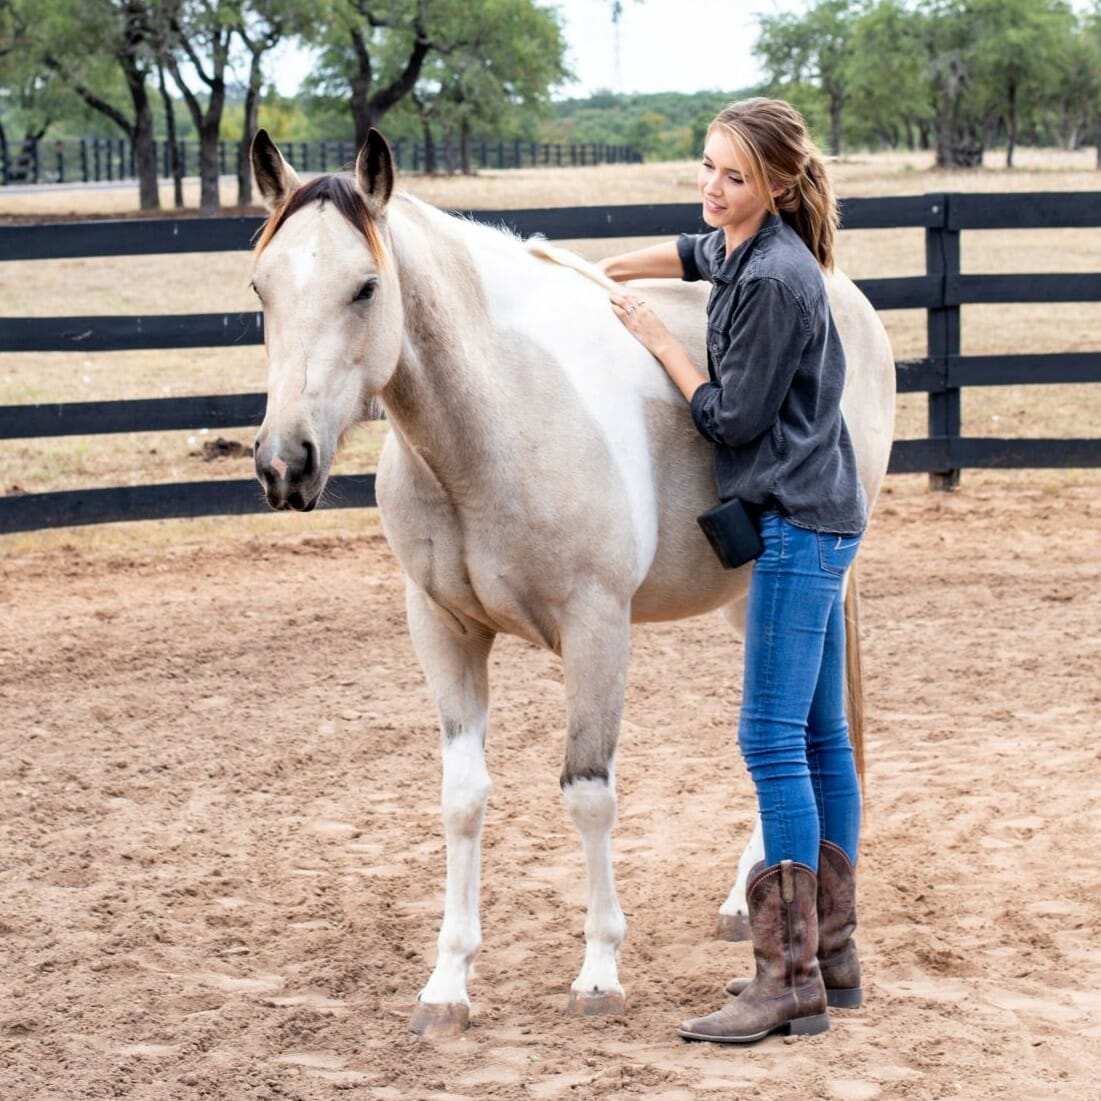 Equitopia blog post: A Proactive and Positive Approach To Caring For Horses